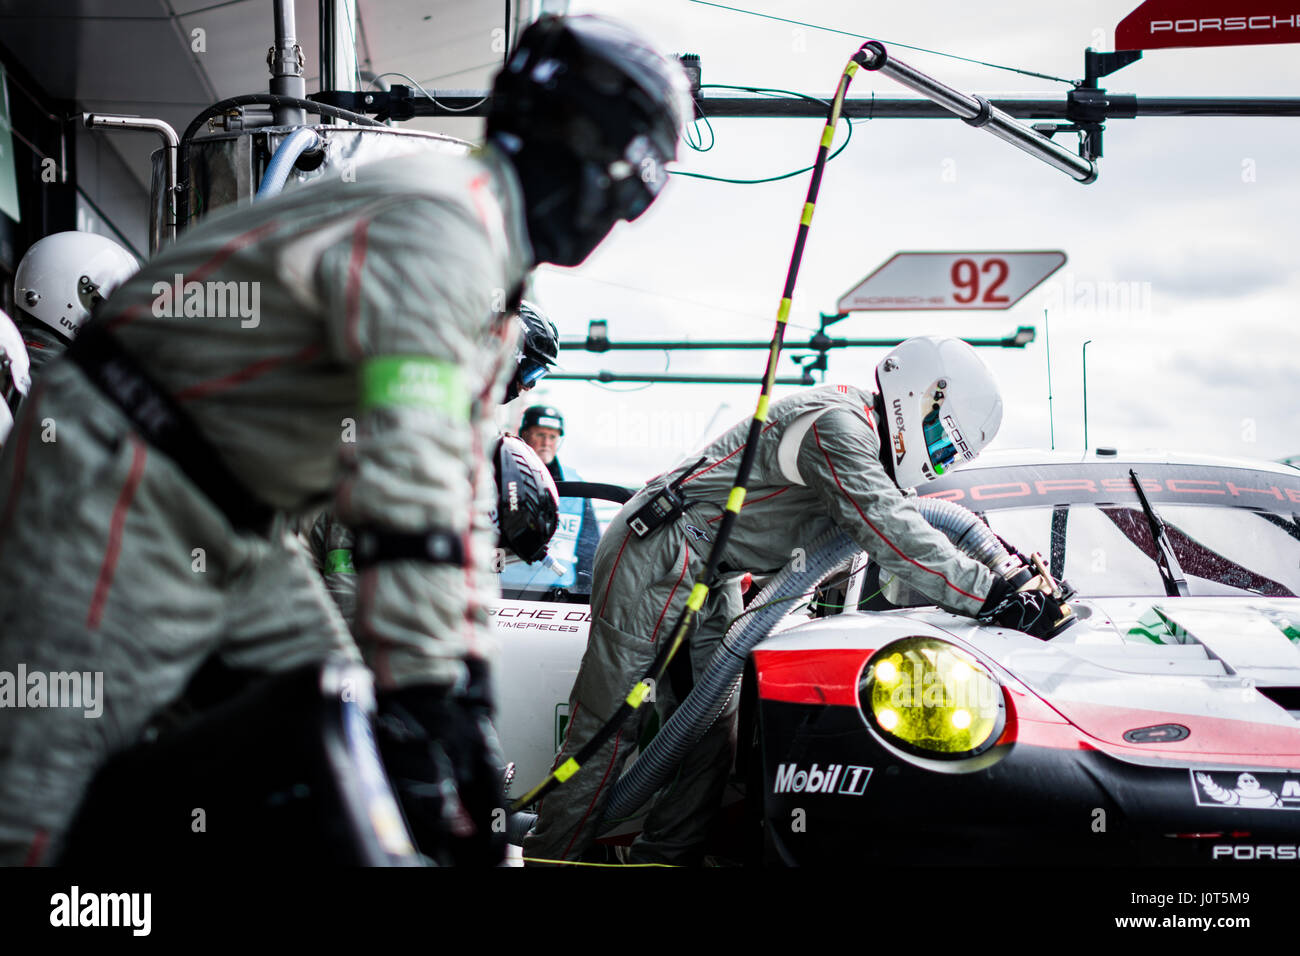 Towcester, Northamptonshire, UK. 16th Apr, 2017. FIA WEC racing team Porsche GT Team during the 6 Hours of Silverstone of the FIA World Endurance Championship Autograph session at Silverstone Circuit Credit: Gergo Toth/Alamy Live News Stock Photo